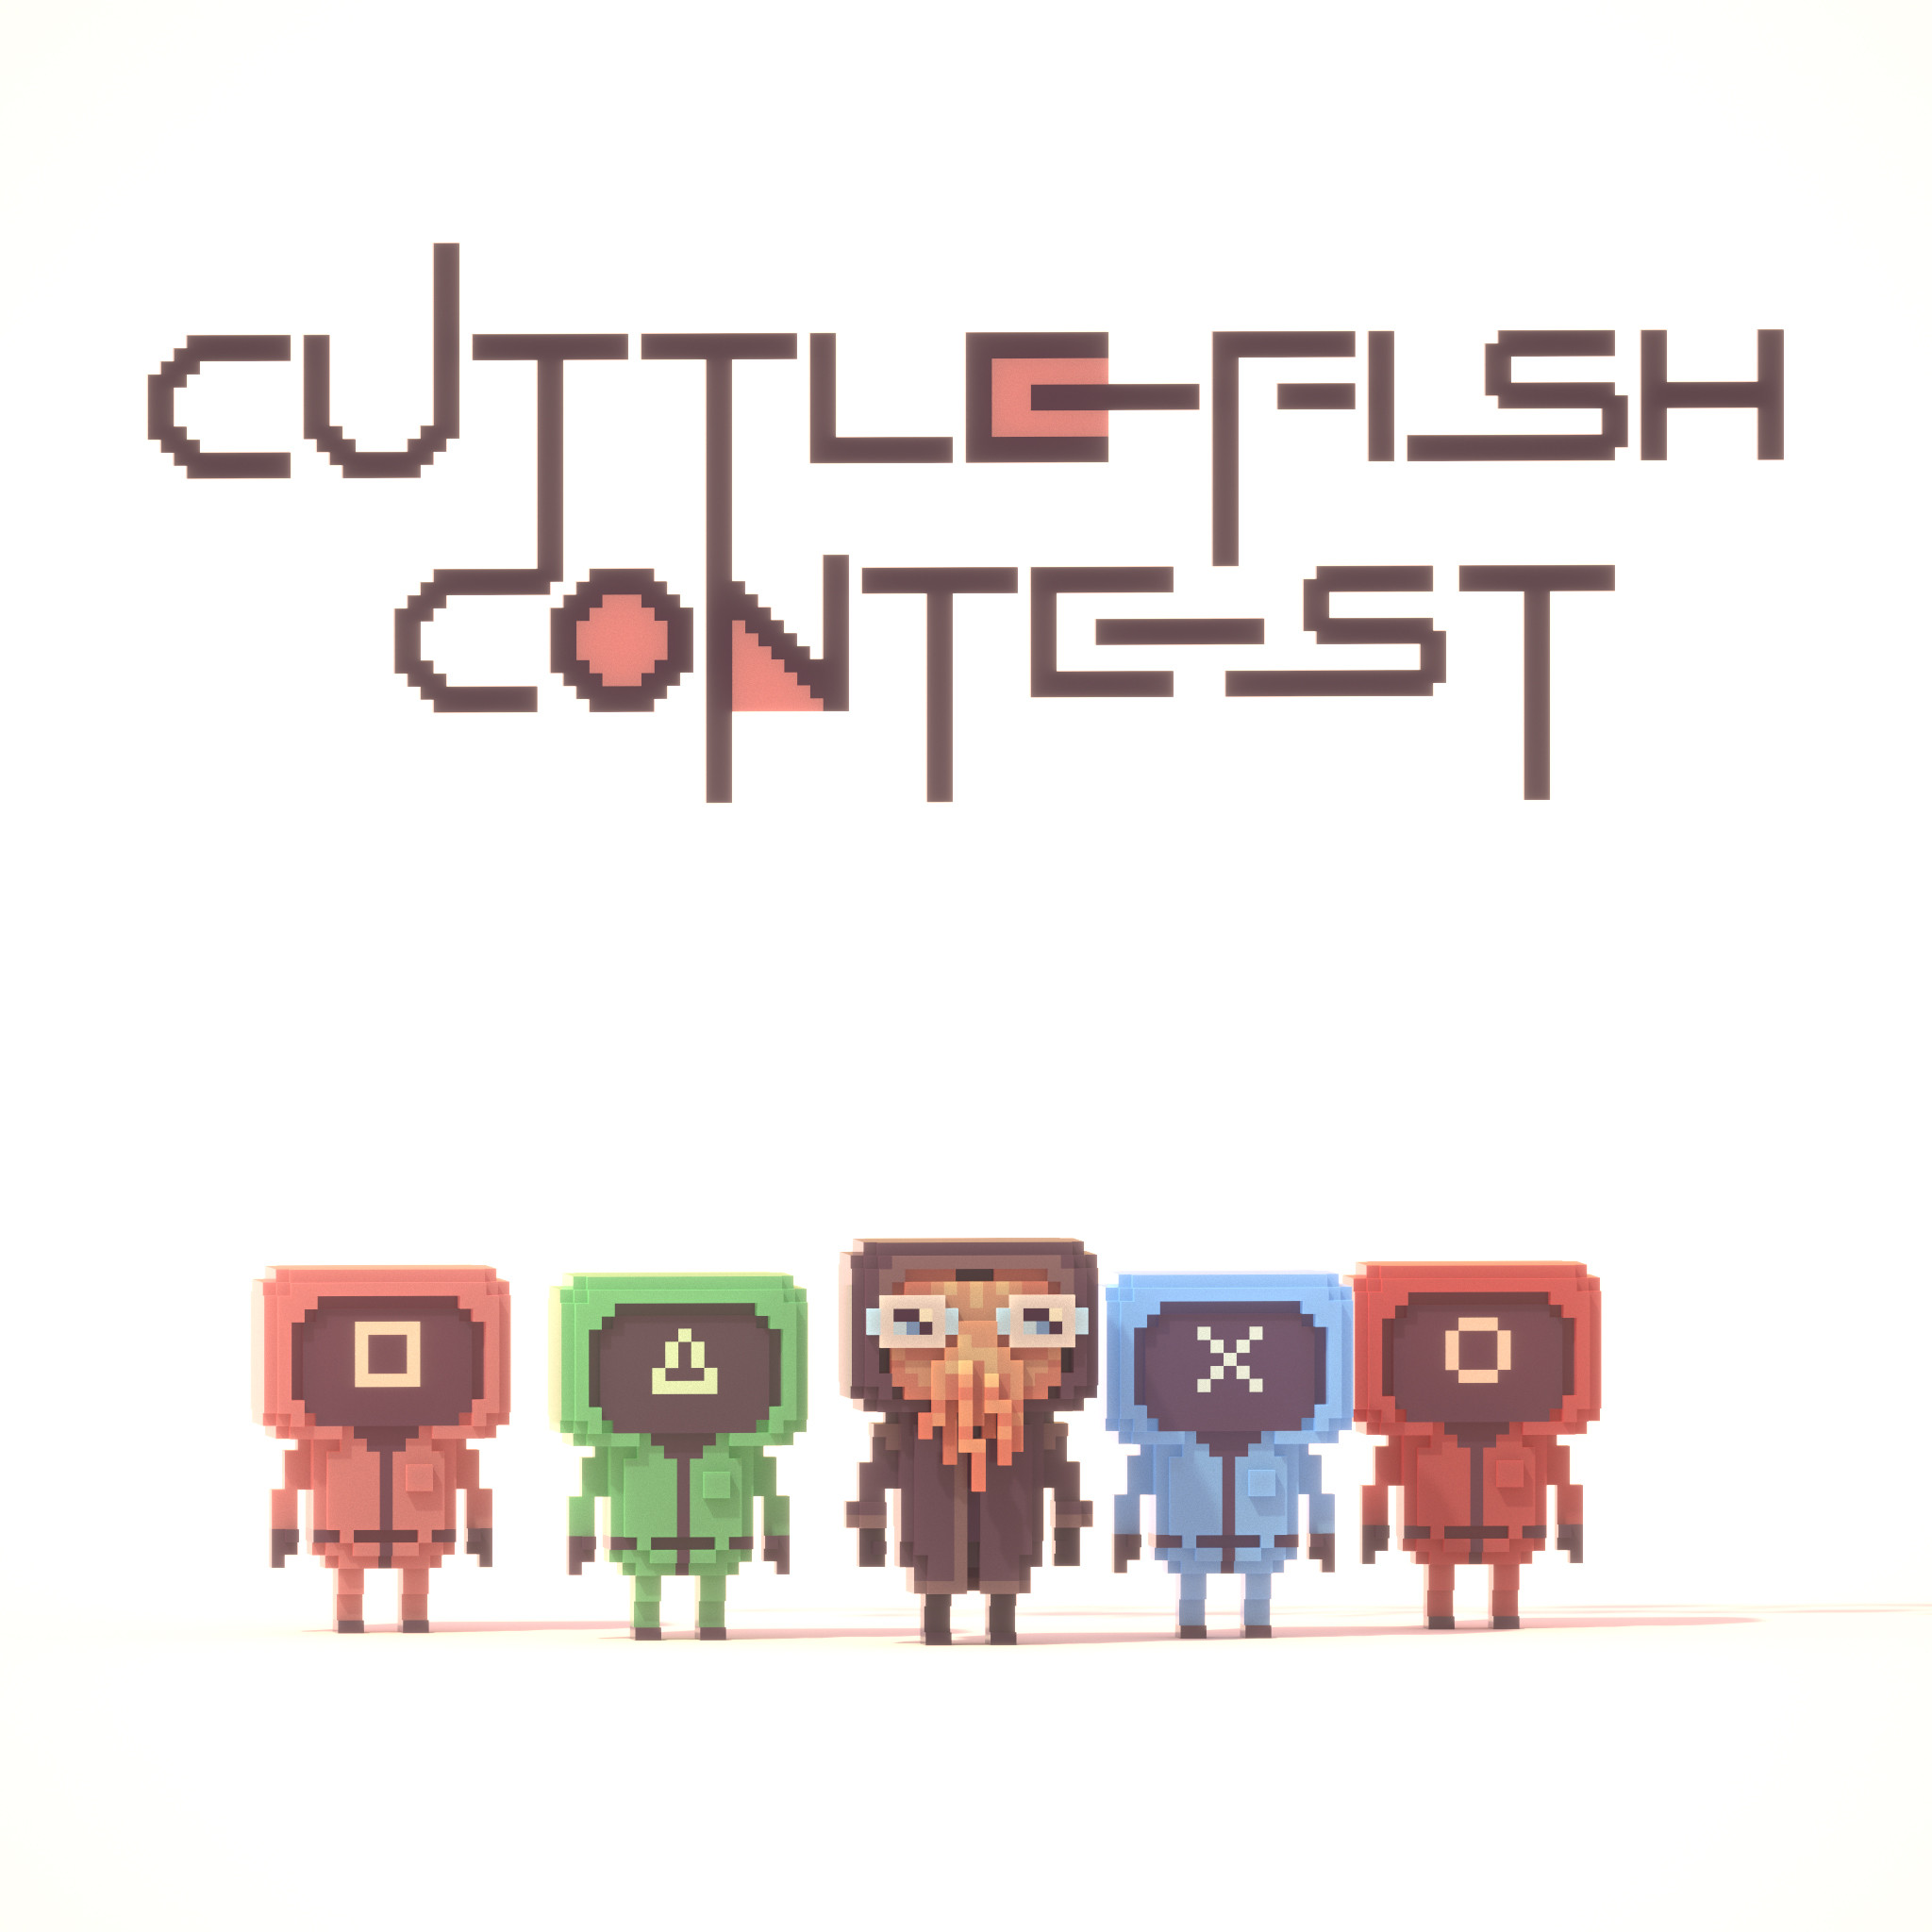 Character and logo design detail render of Cuttlefish Contest.